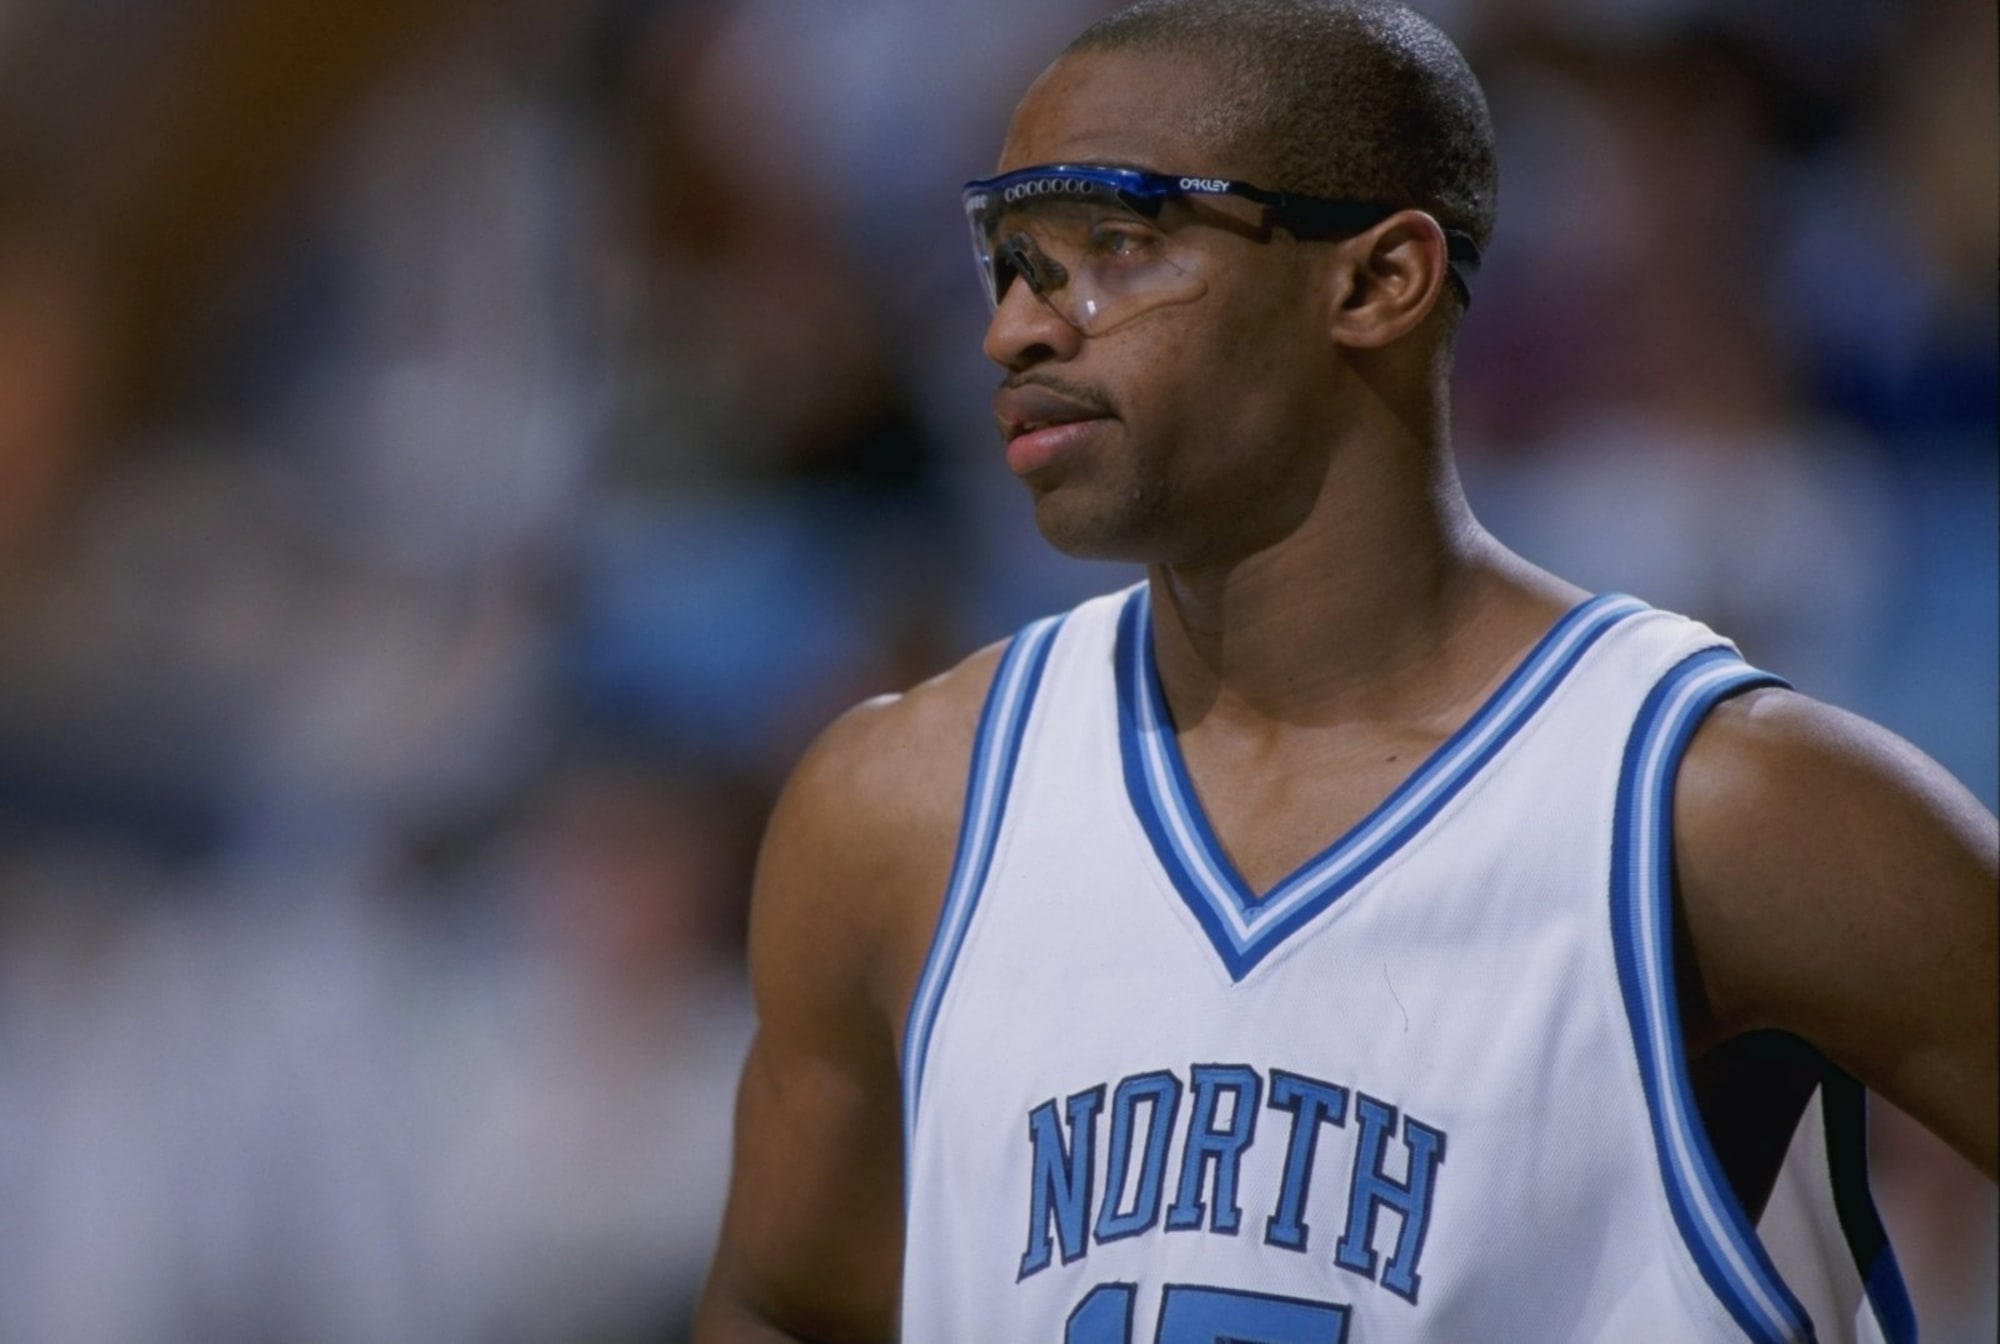 Get to Know: Vince Carter